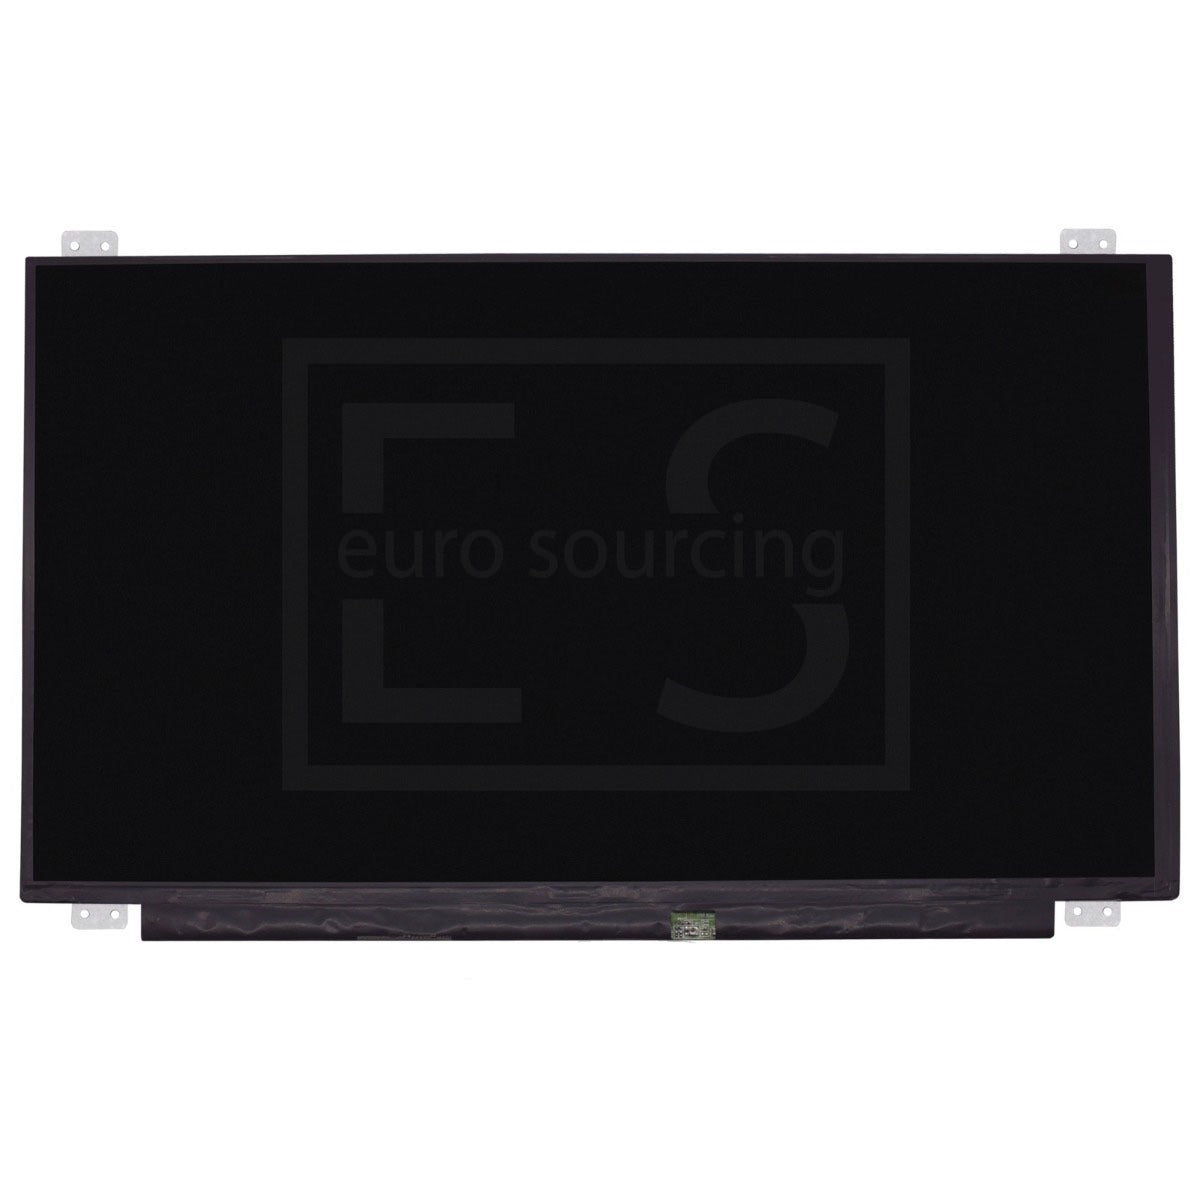 New Replacement LP156WF6 (SP)(K1) Screen 15.6" FHD LED NON IPS MATTE DISPLAY PANEL Compatible With MSI GL62M 7RDX 1018XID